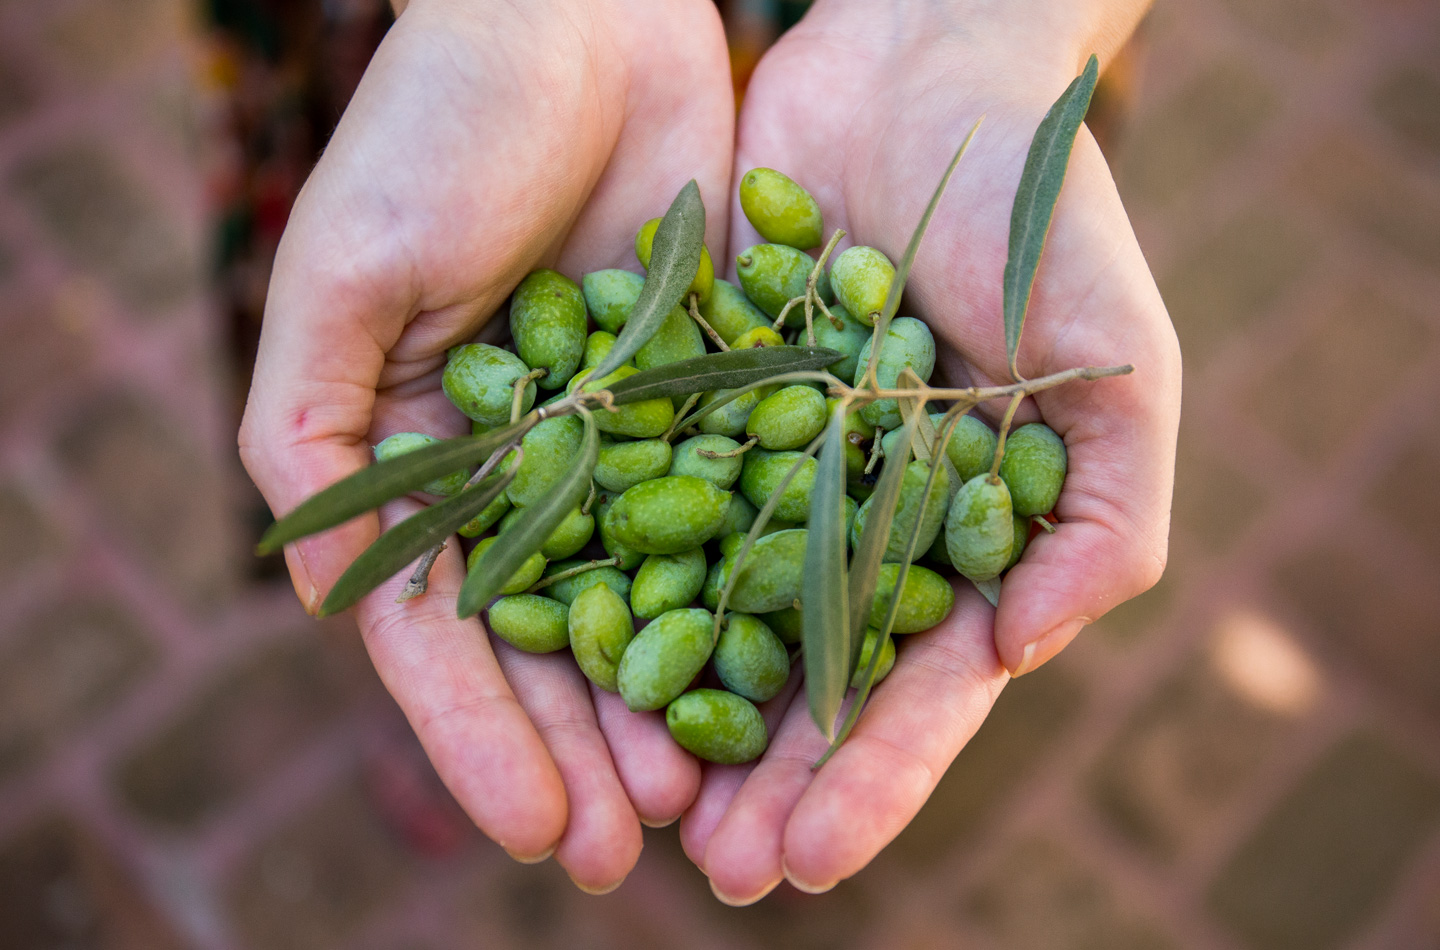 Lefkada's traditional products | Greek olives | Lefkada Slow Guide